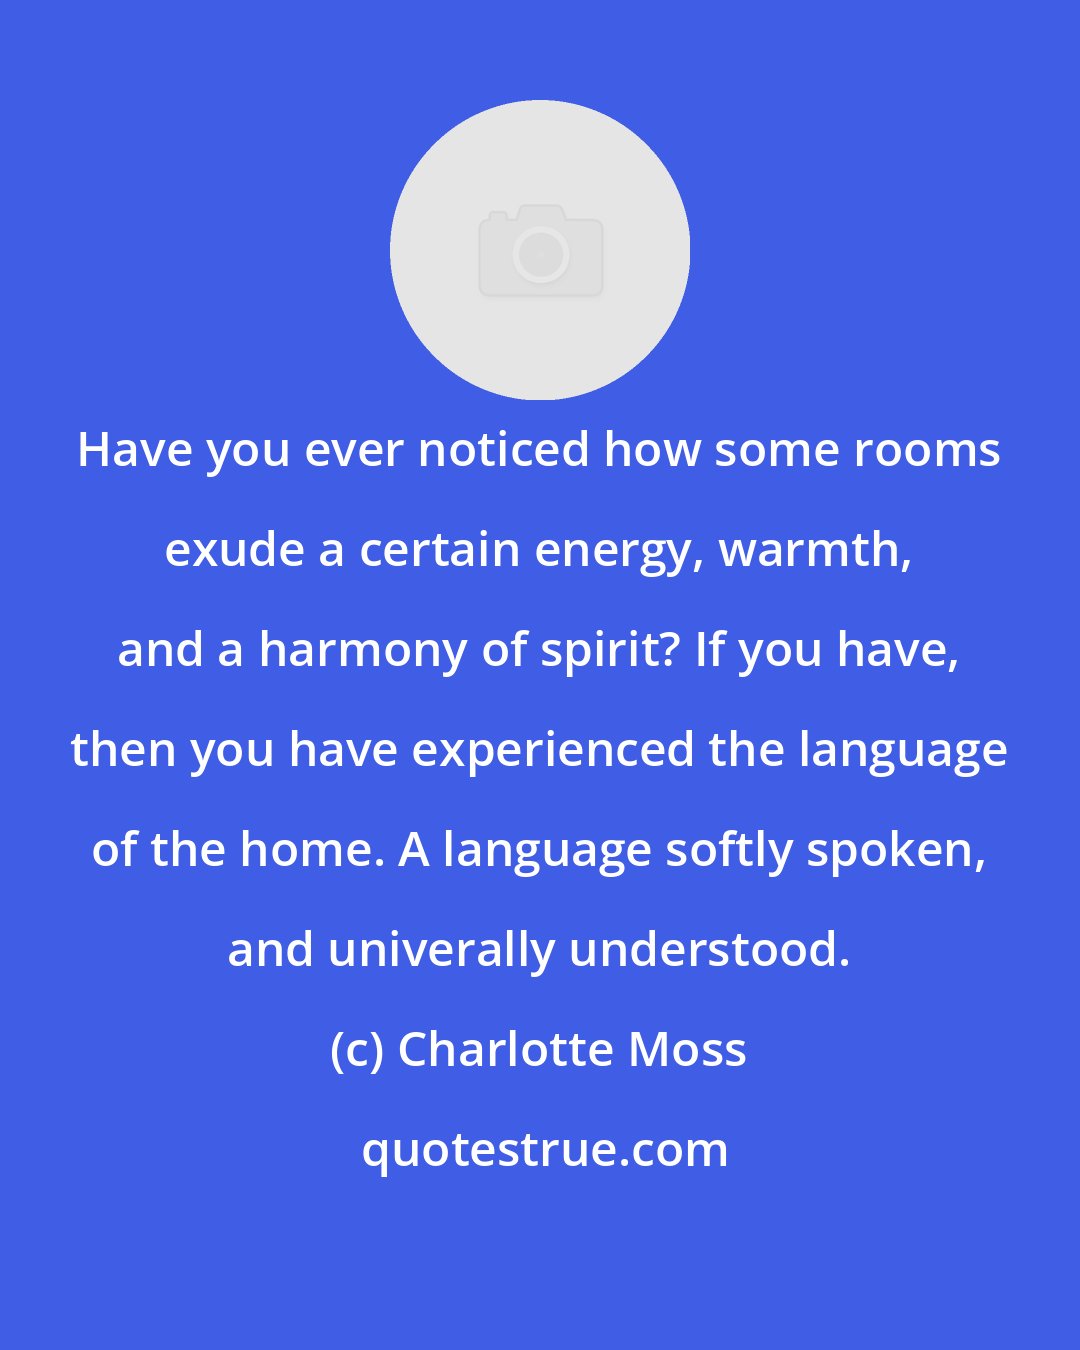 Charlotte Moss: Have you ever noticed how some rooms exude a certain energy, warmth, and a harmony of spirit? If you have, then you have experienced the language of the home. A language softly spoken, and univerally understood.